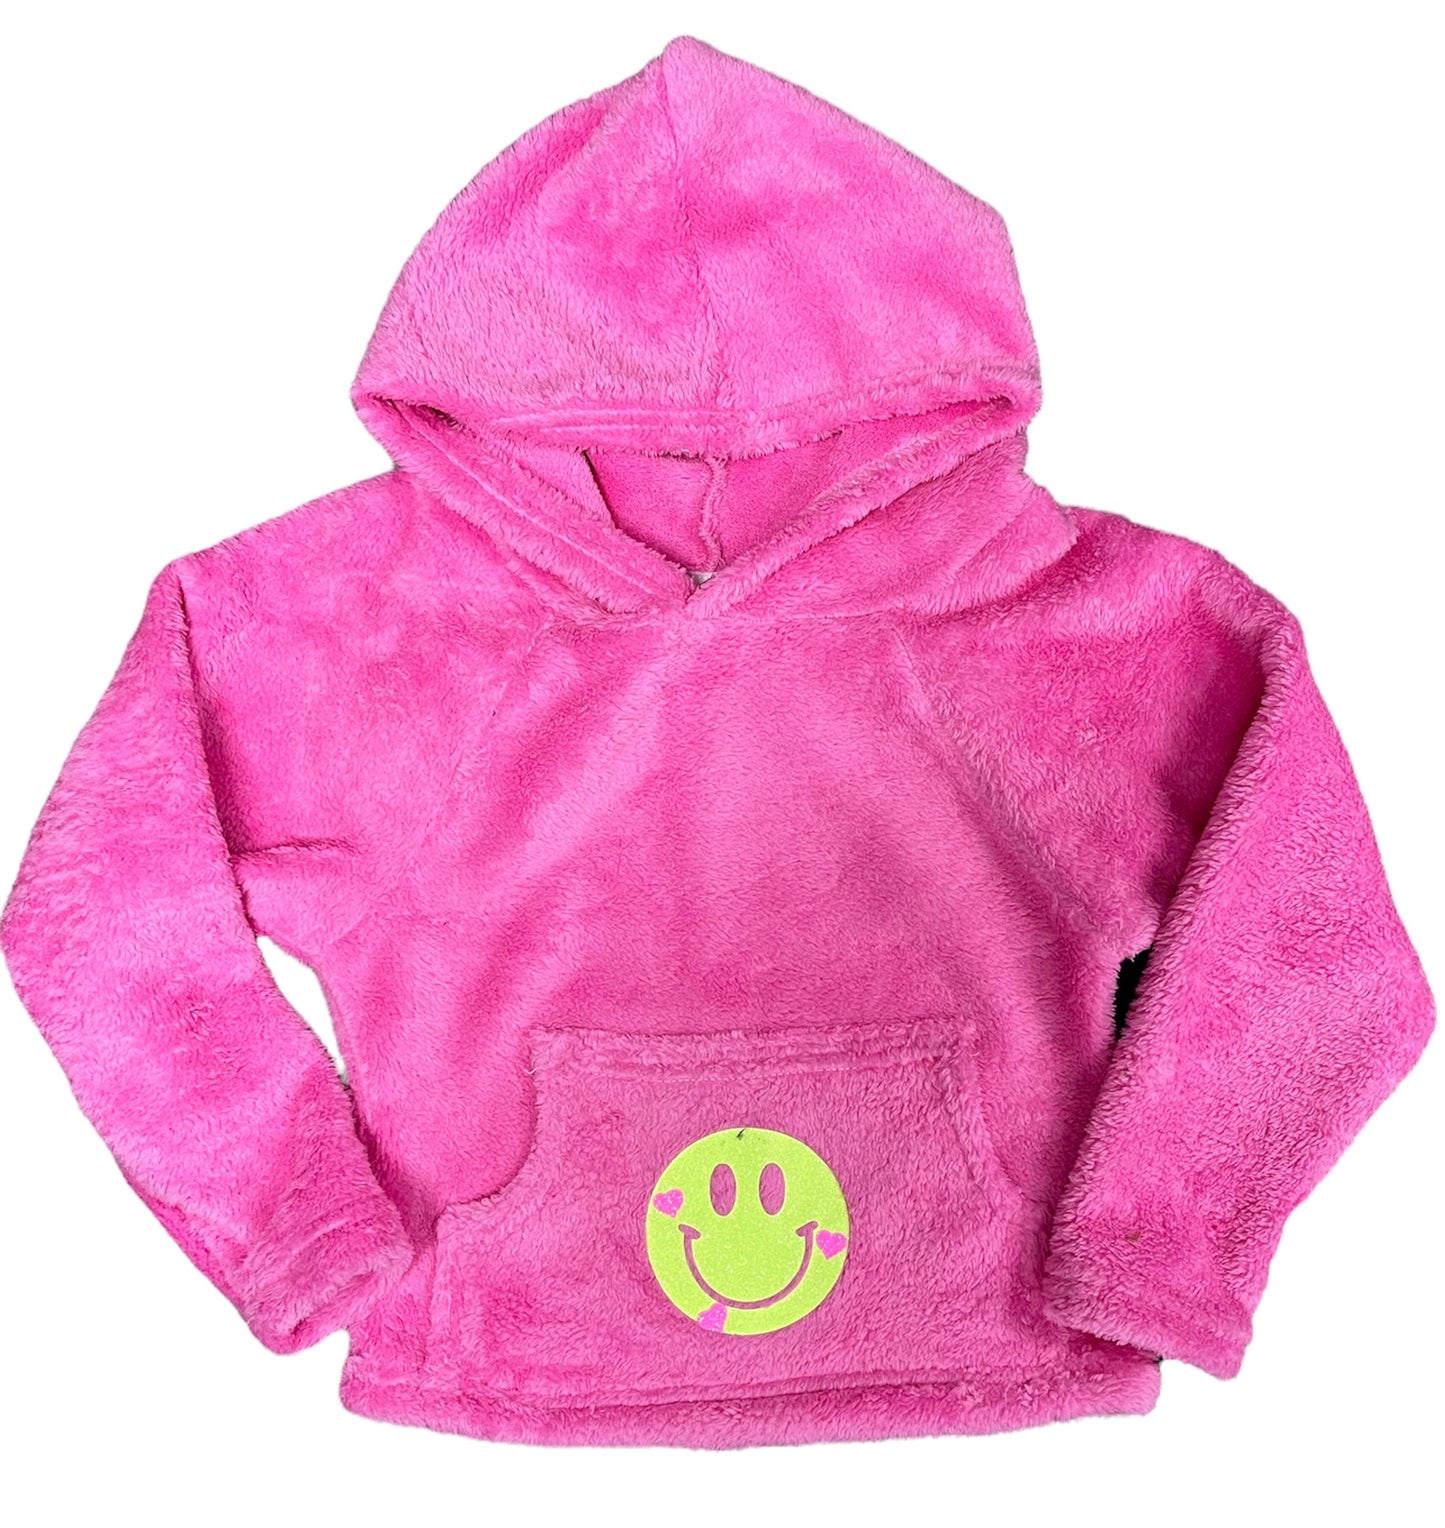 Pink fuzzy hoodie with smiley face